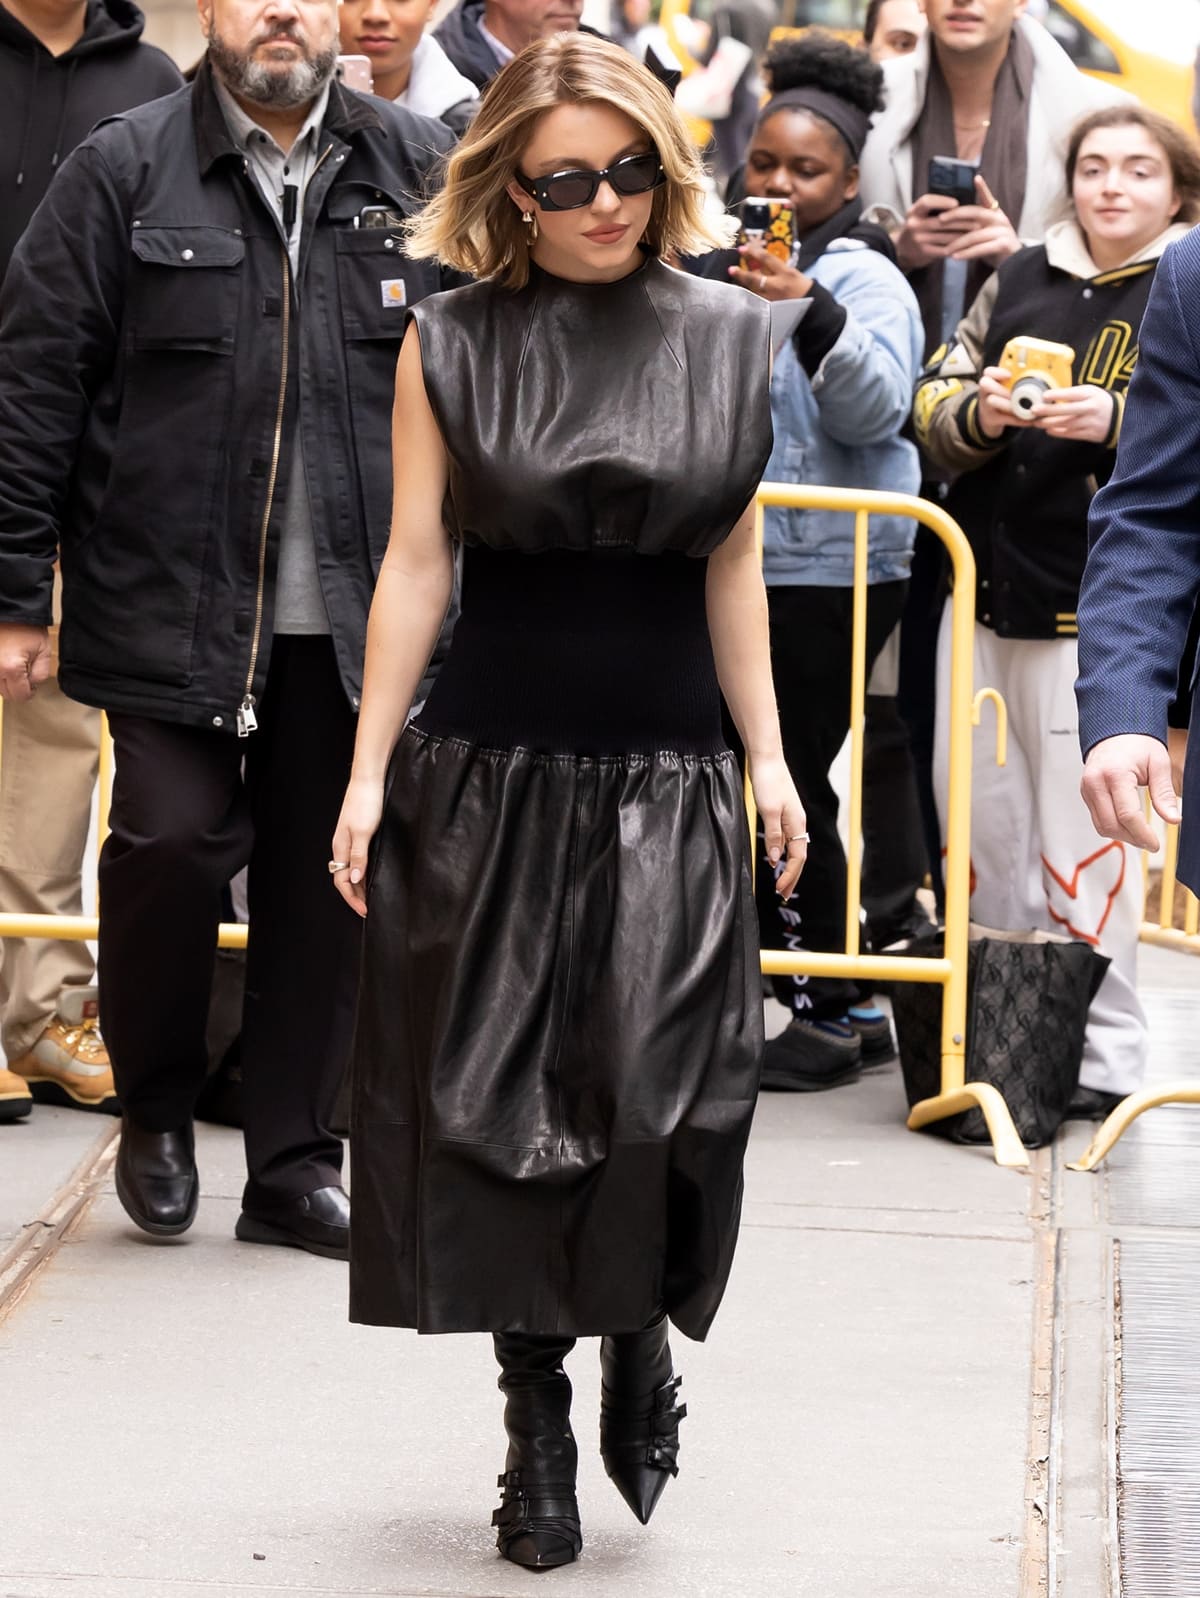 Sydney Sweeney exudes a captivating blend of biker chic and 1940s glamour in a $5,400 black leather 'The Uni' dress by Khaite, complete with a mock-neck top and keyhole slit detailing, as she steps out in Manhattan's Upper West Side to tape an episode for The View